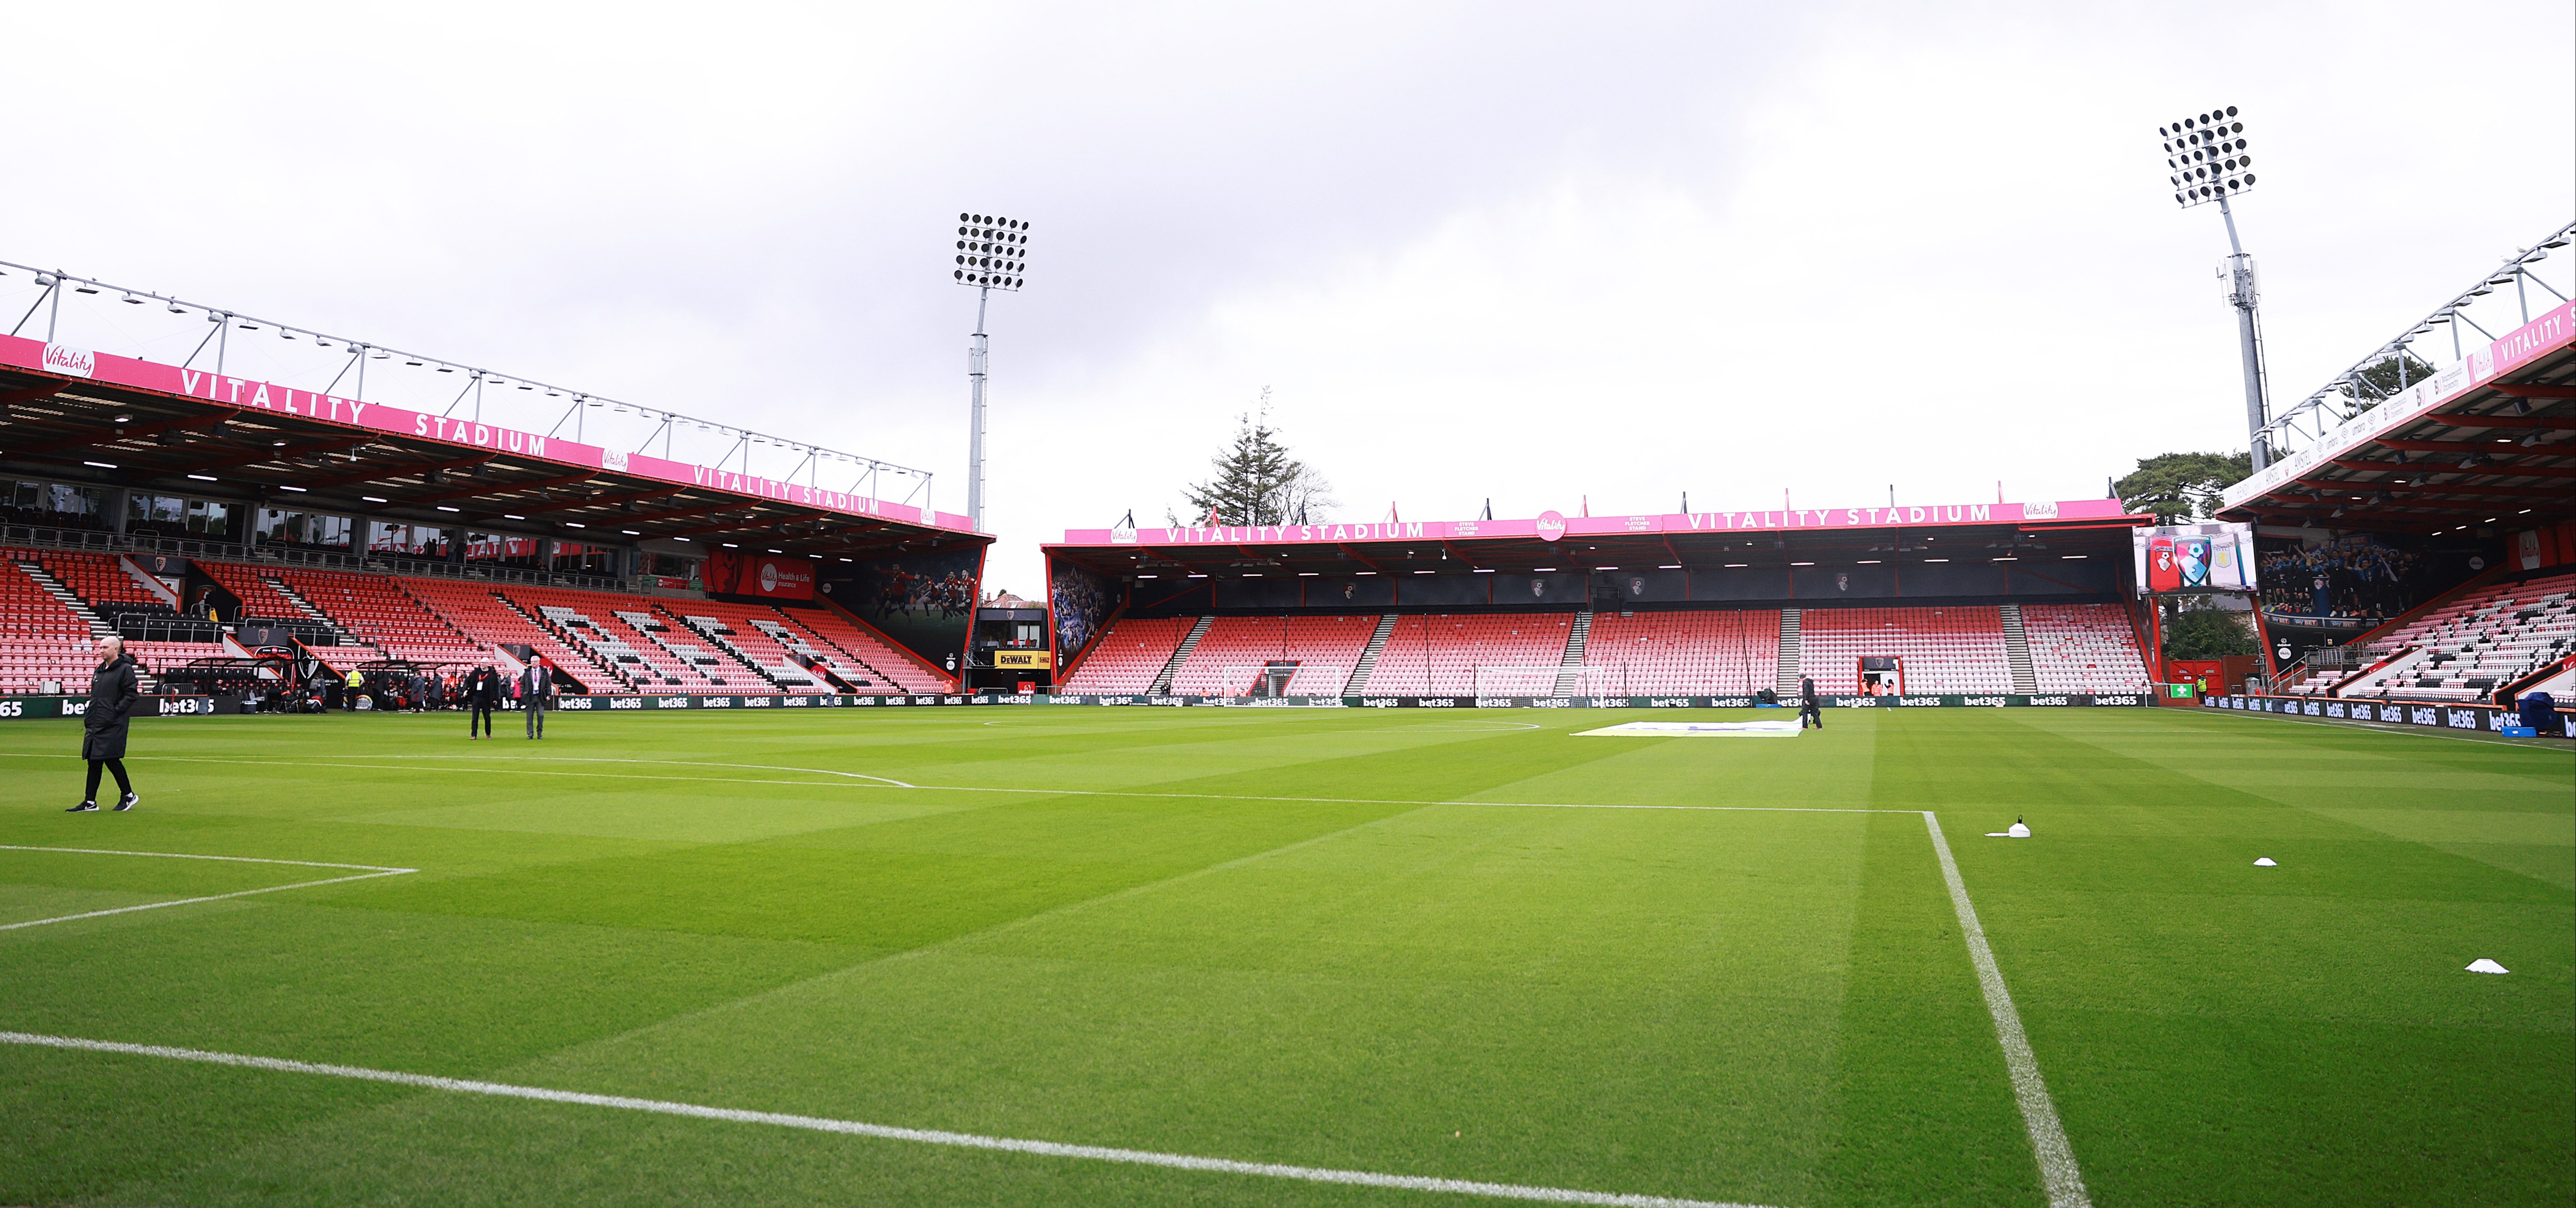 The Vitality Stadium as it is now looks small by comparison